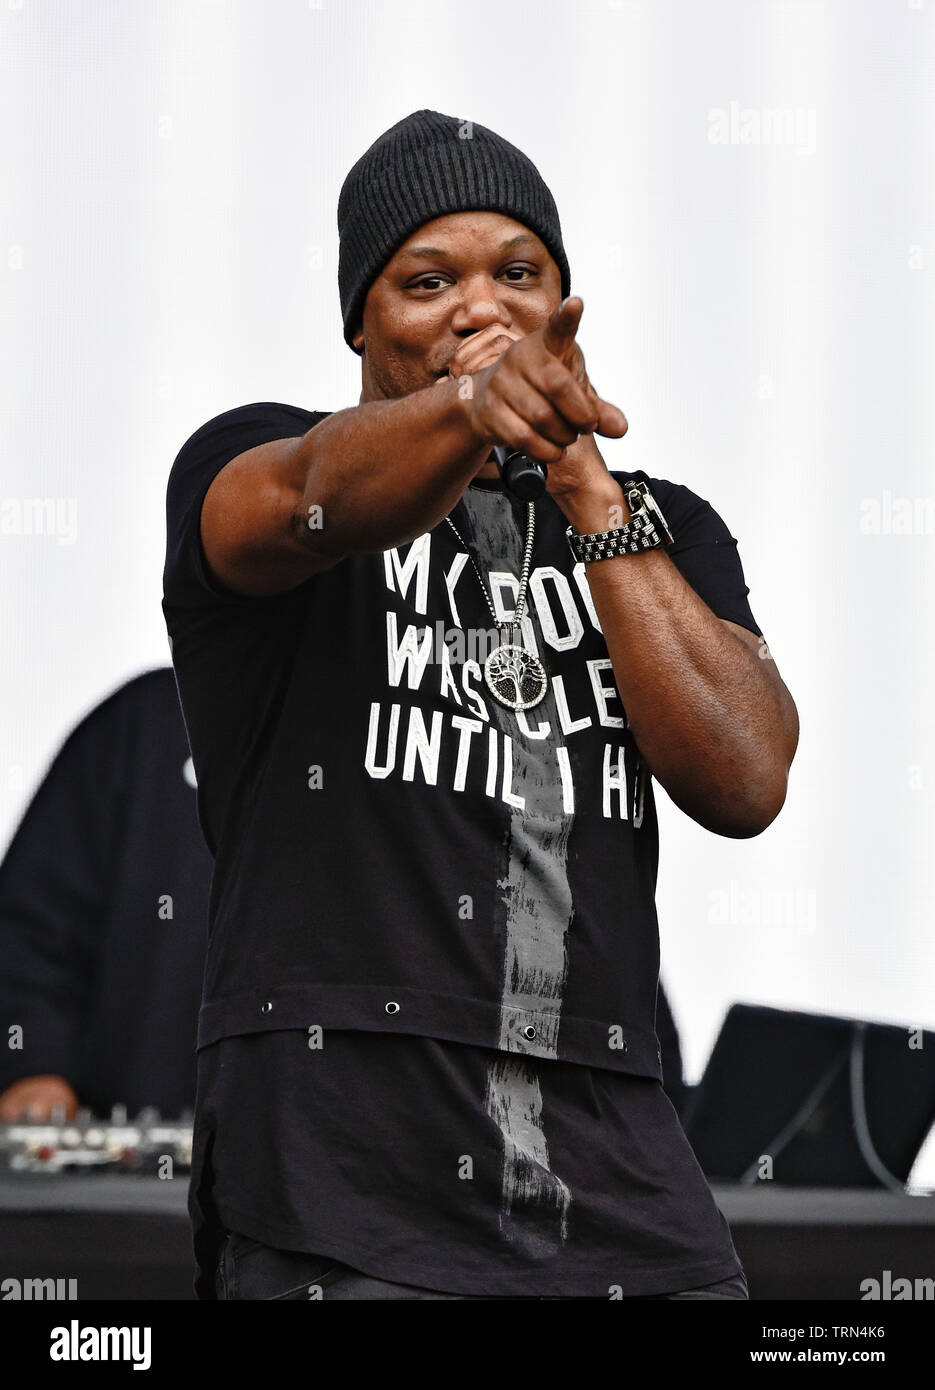 Rap artist, Too Short, performing on stage at the BottleRock Festival 2019, Napa Valley, California. Stock Photo